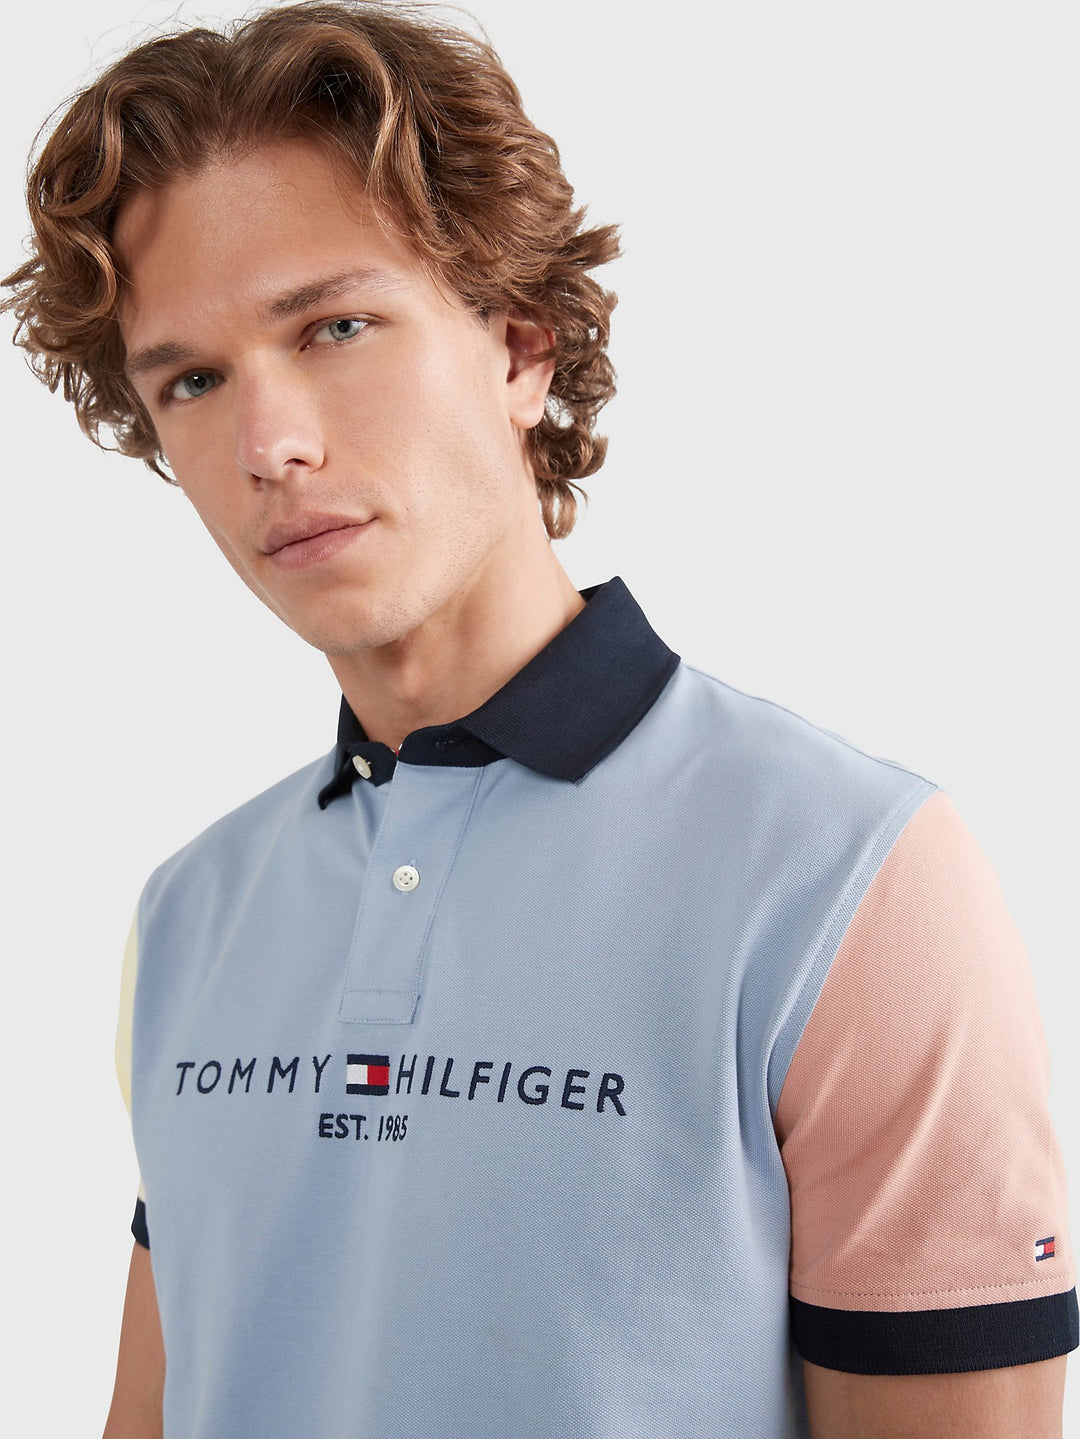 Tommy Hilfiger Mens S/S Tommy Flag Polo-SB-78J8748